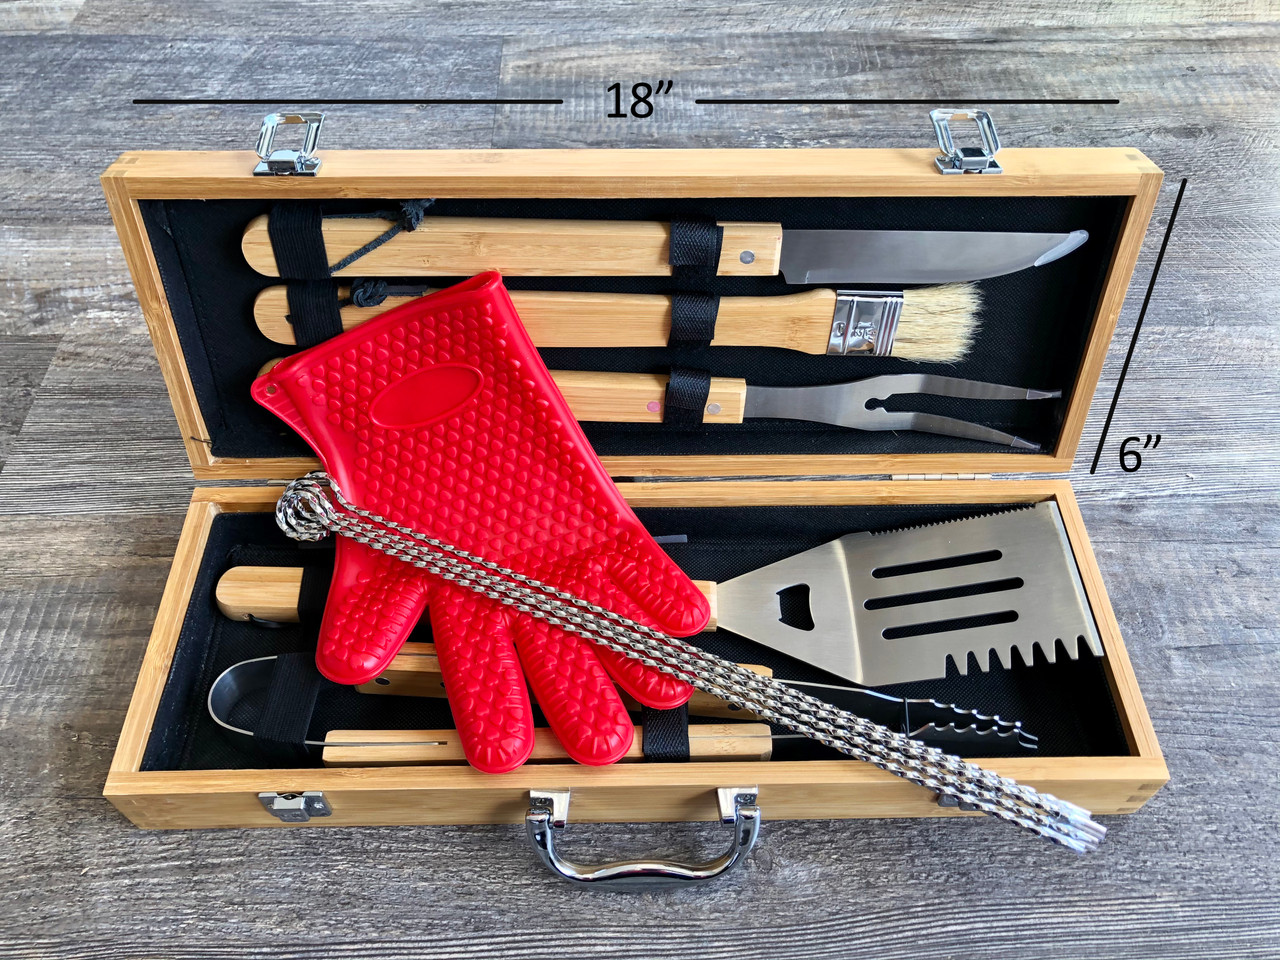 Grill Master Crate, BBQ Gifts For Guys